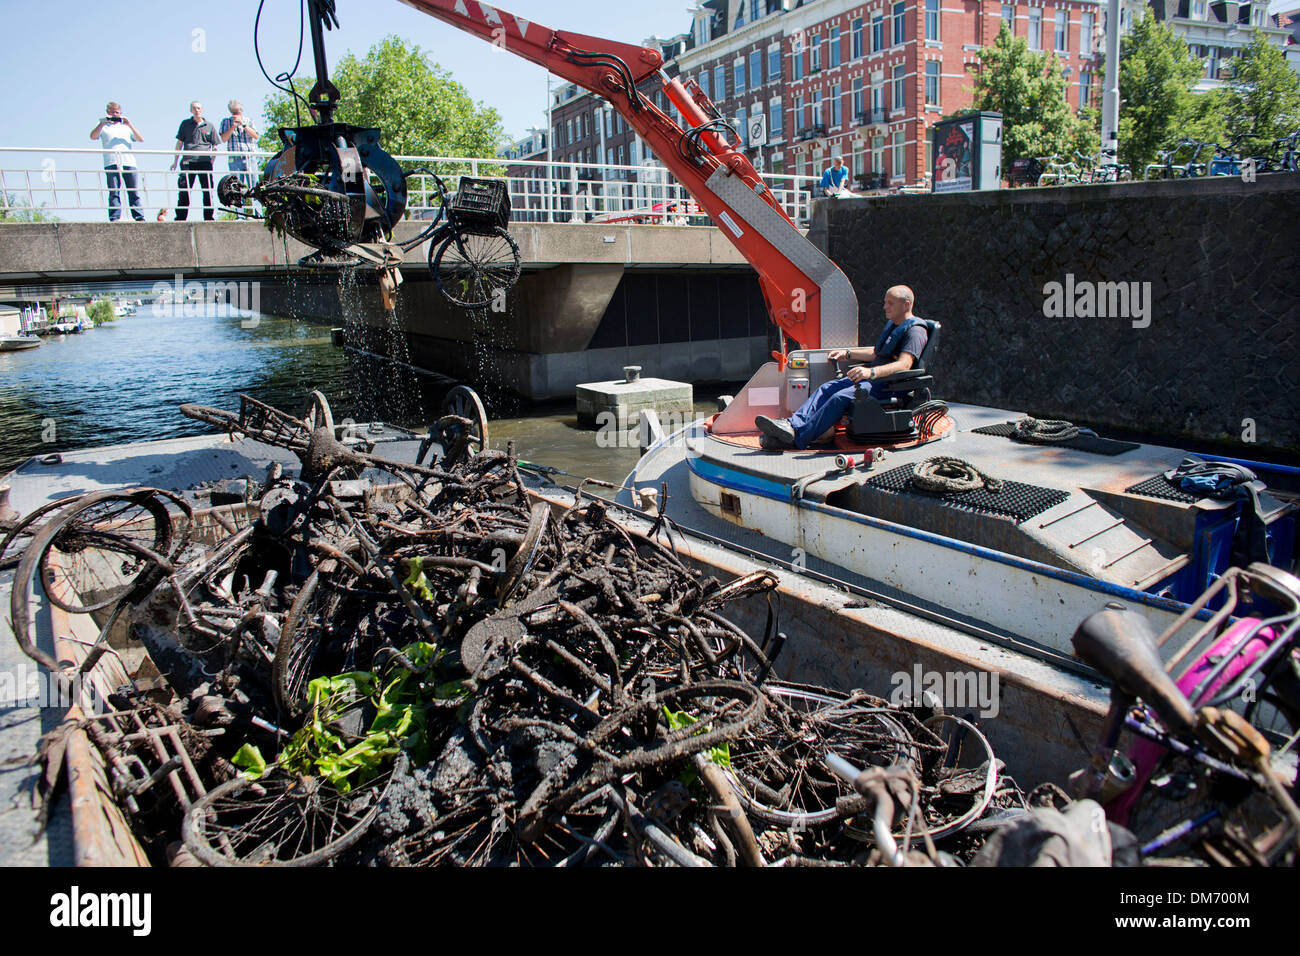 [Image: removing-bicycles-from-the-canals-in-ams...DM700M.jpg]